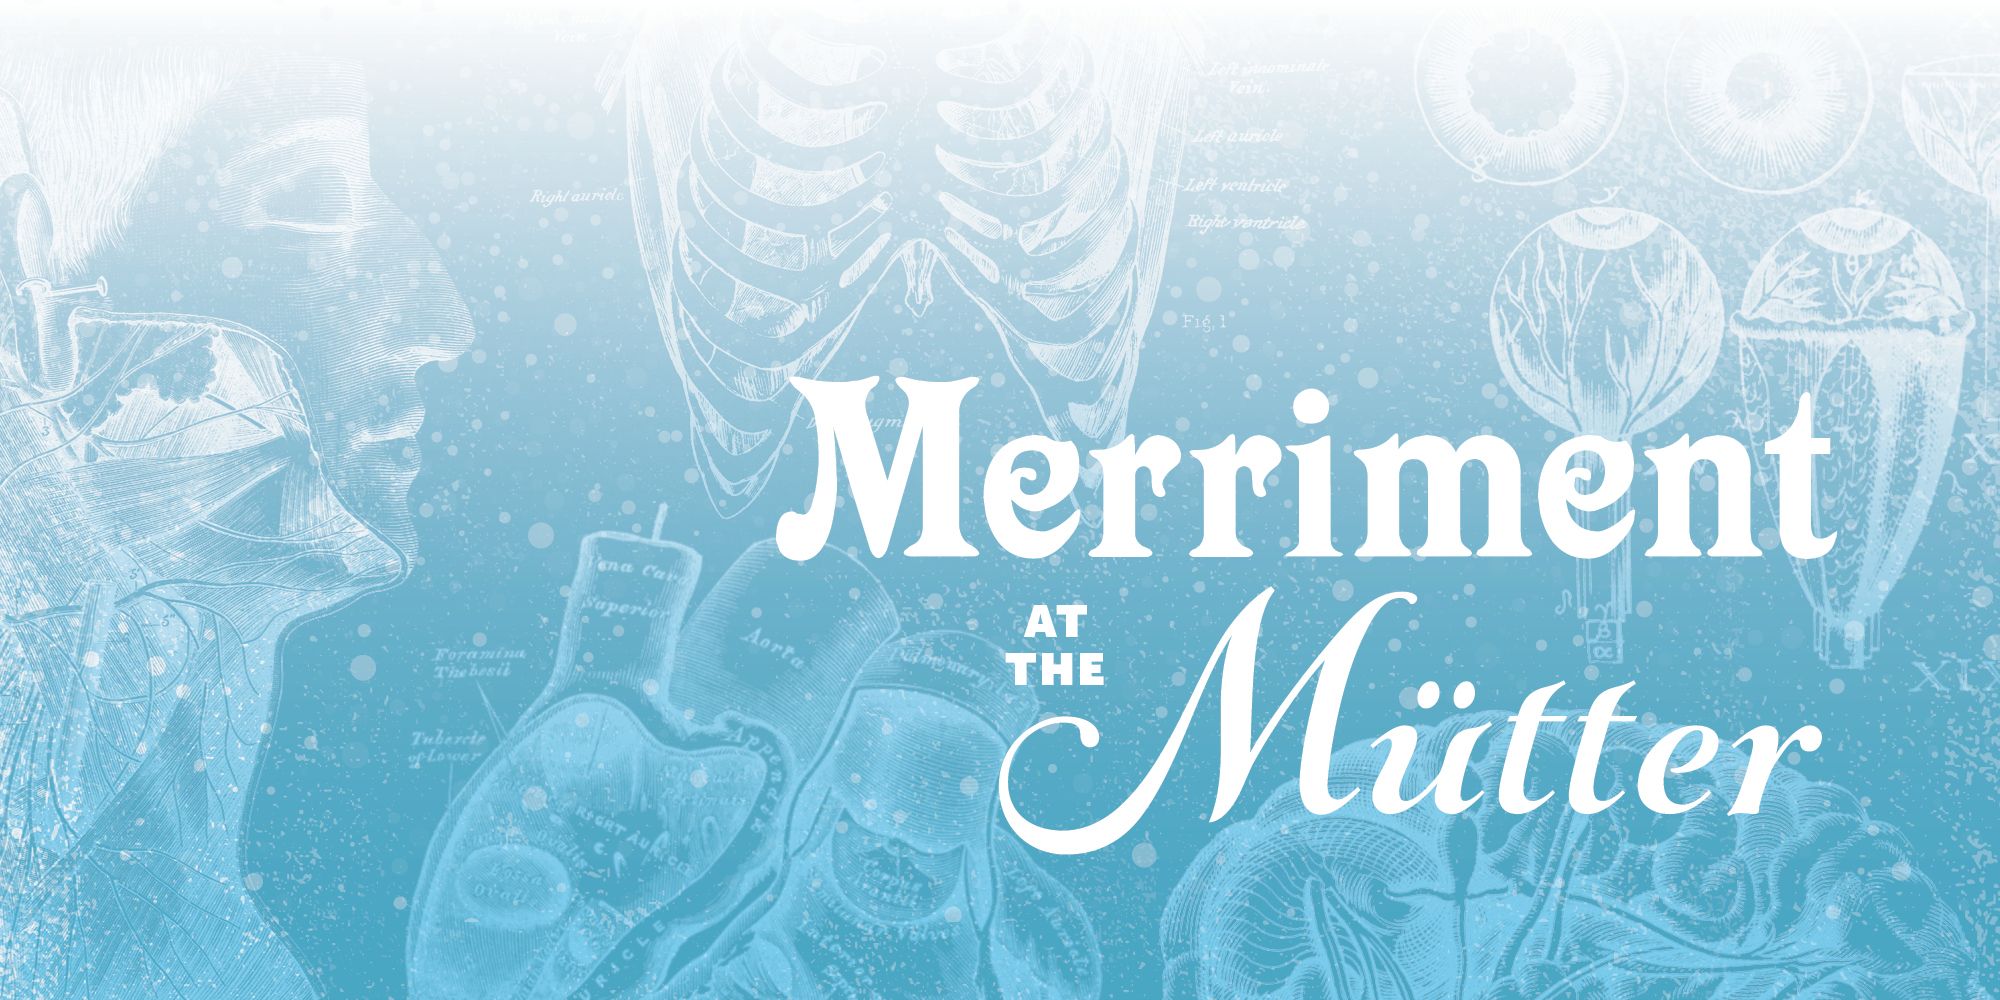 Light blue background with anatomical illustrations and text reading "Merriment at the Mütter".